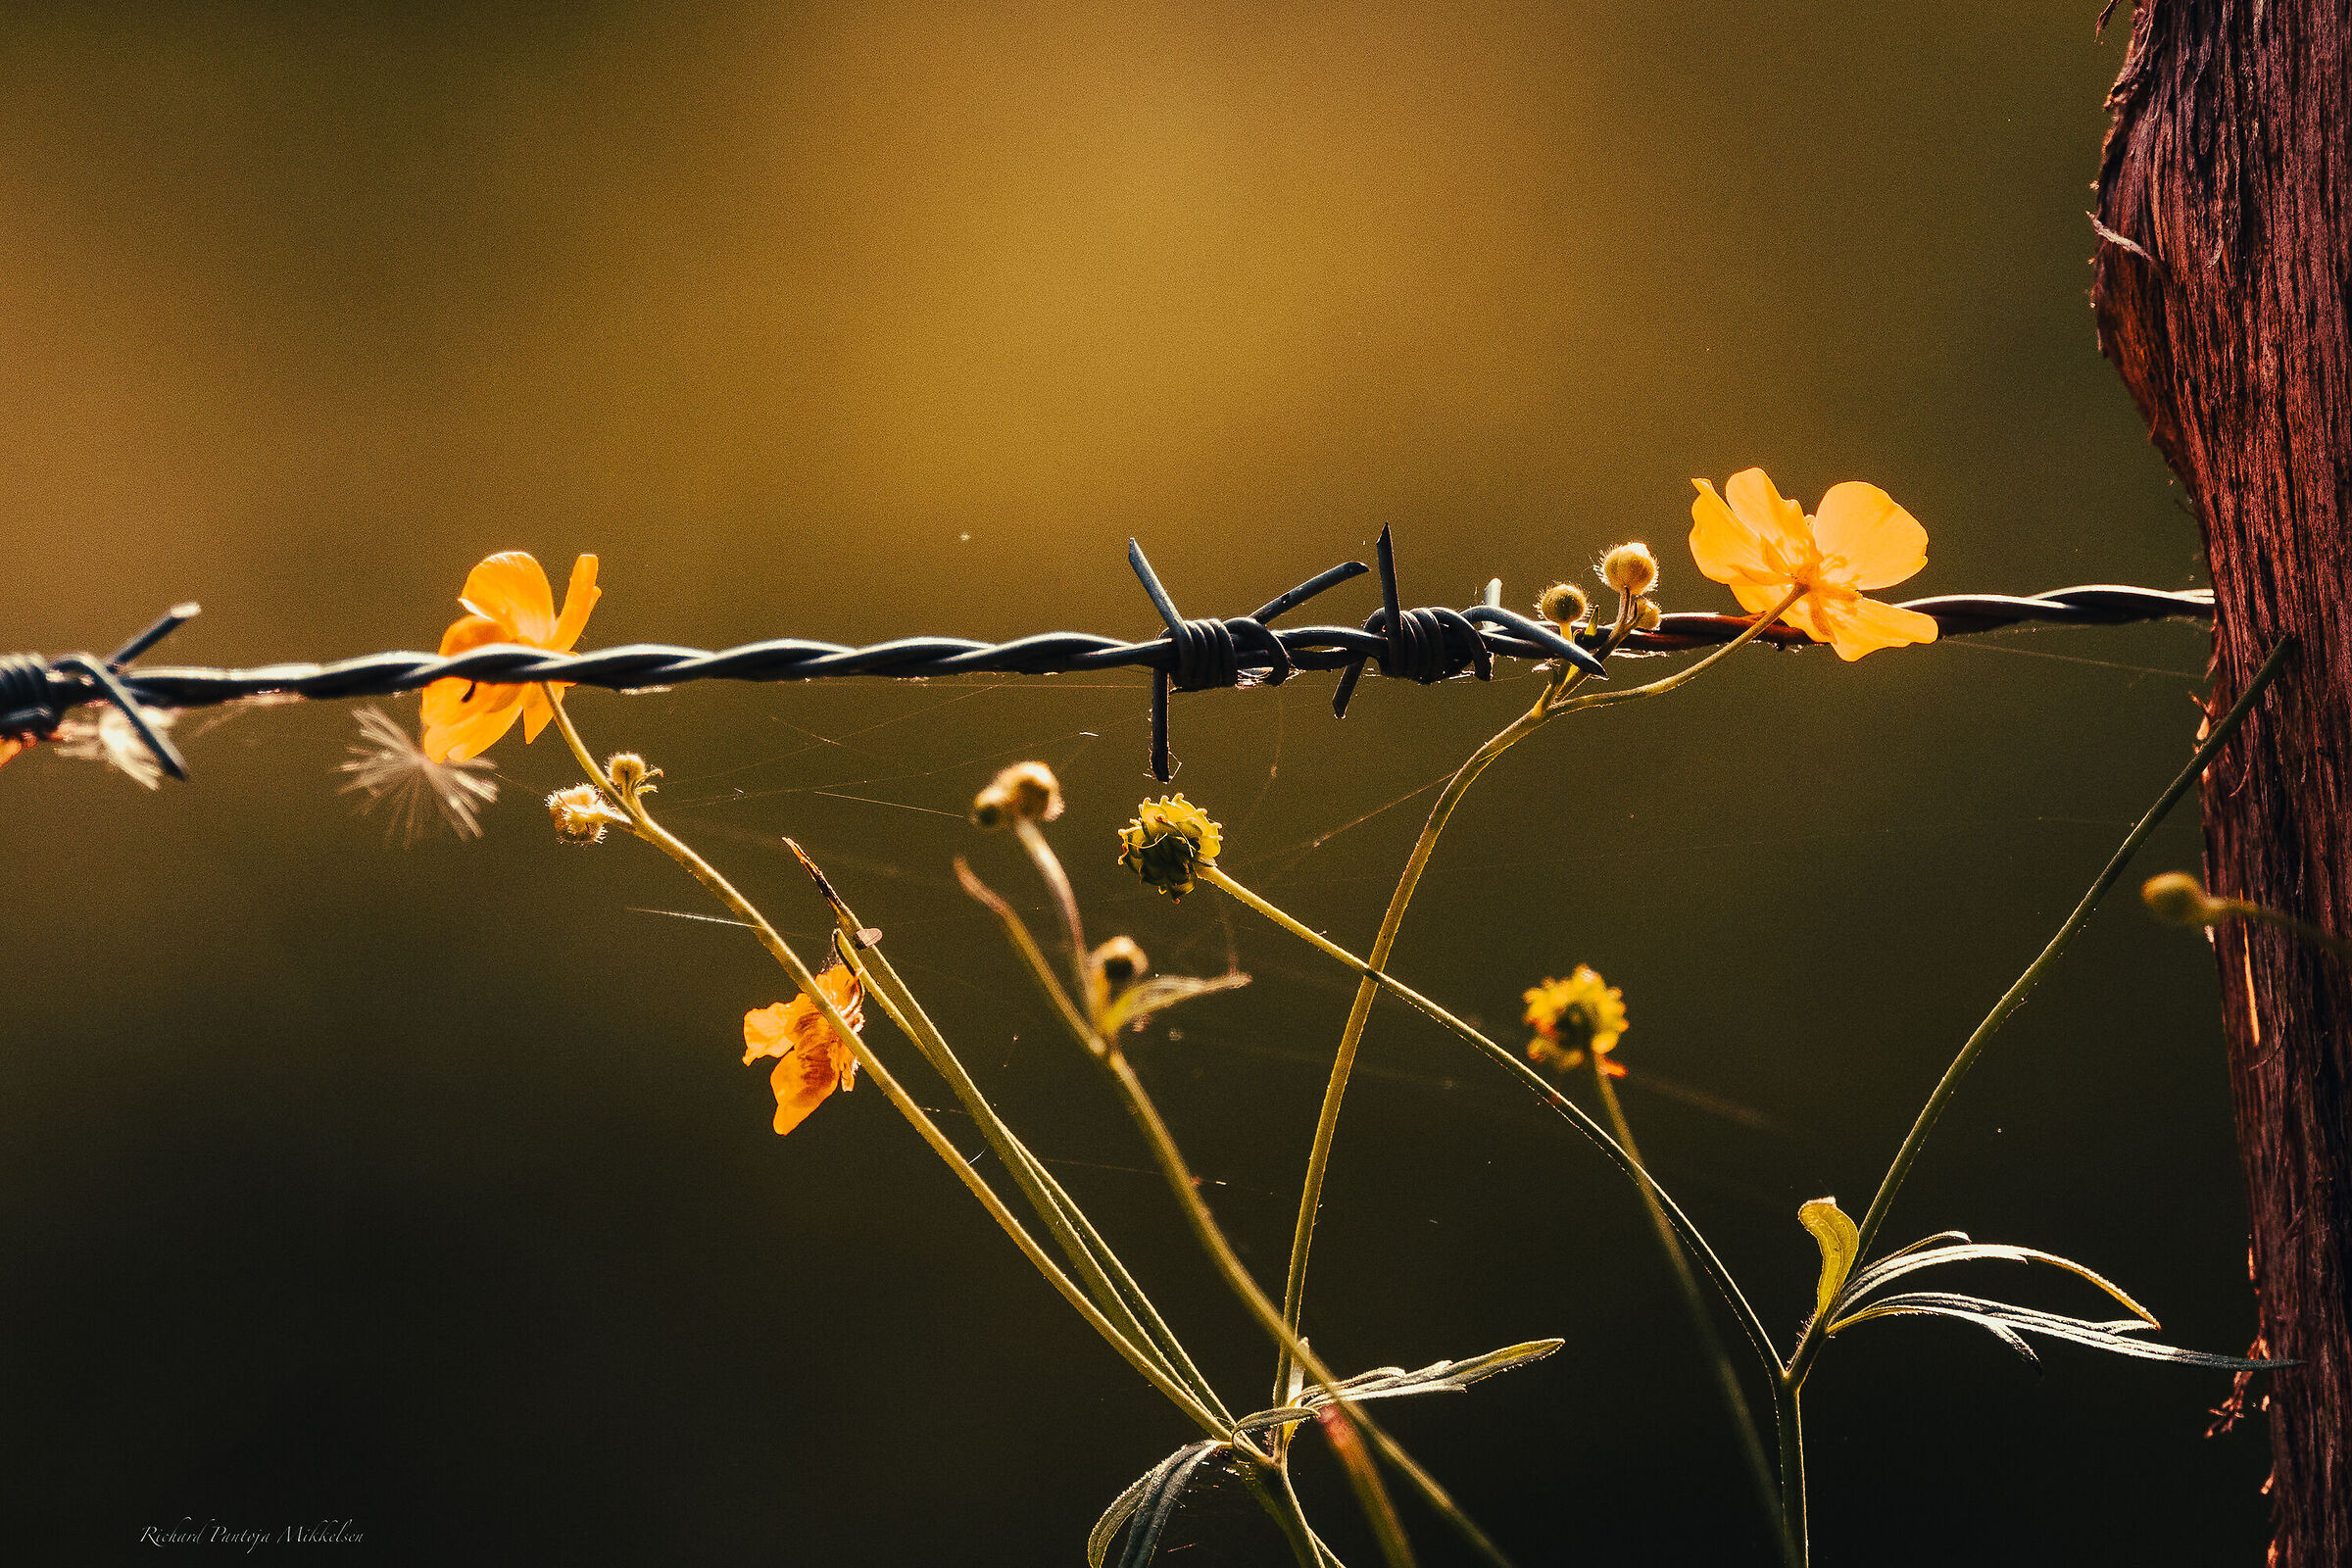 Barbed wire and flowers...